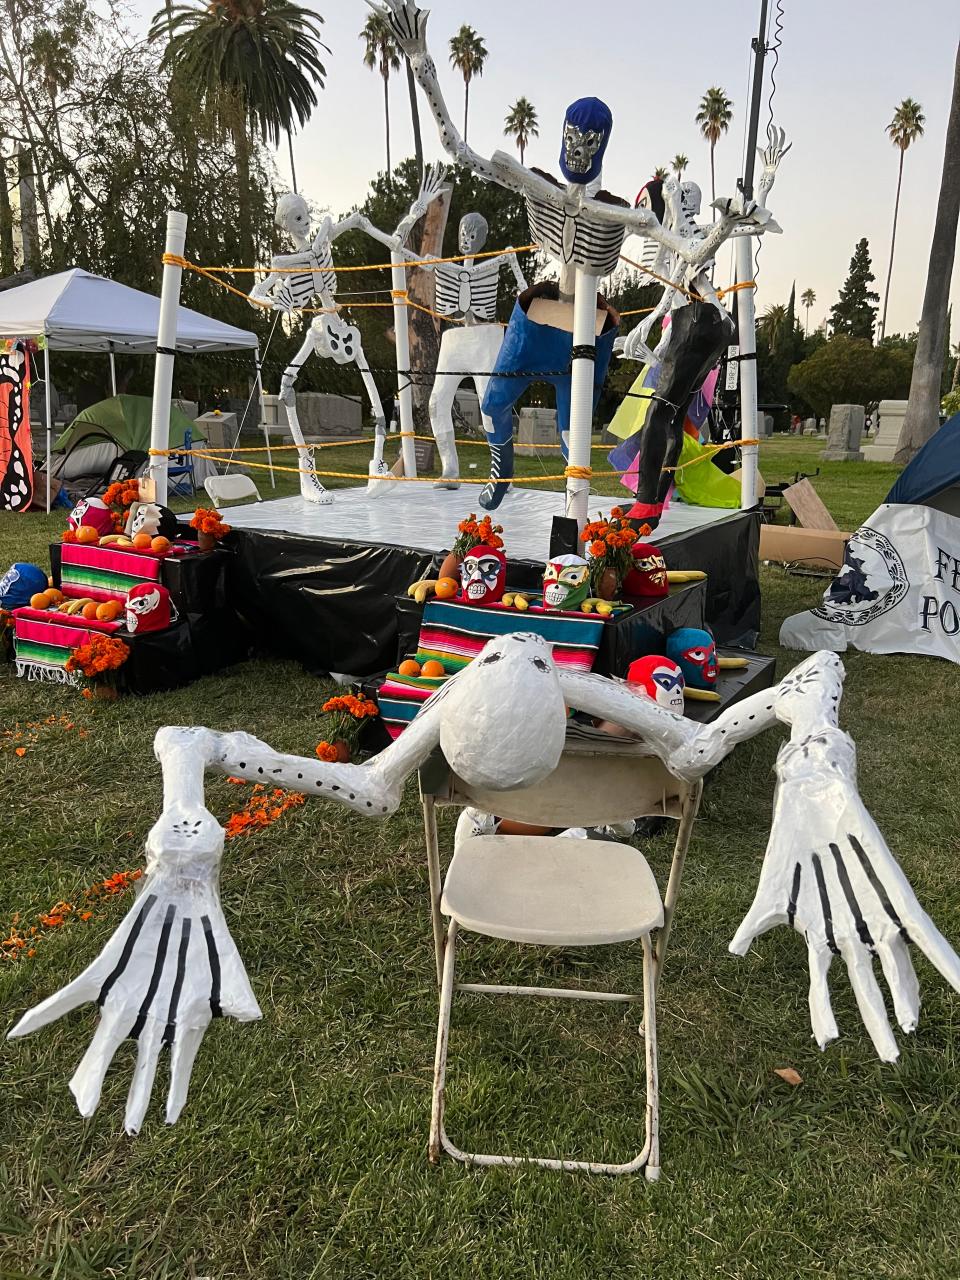 Skeleton "luchadores," or wrestlers, "fight" in a "Lucha libre" match at the Día de Los Muertos celebration at the Hollywood Forever Cemetery in Los Angeles on Saturday, Oct. 28, 2023.